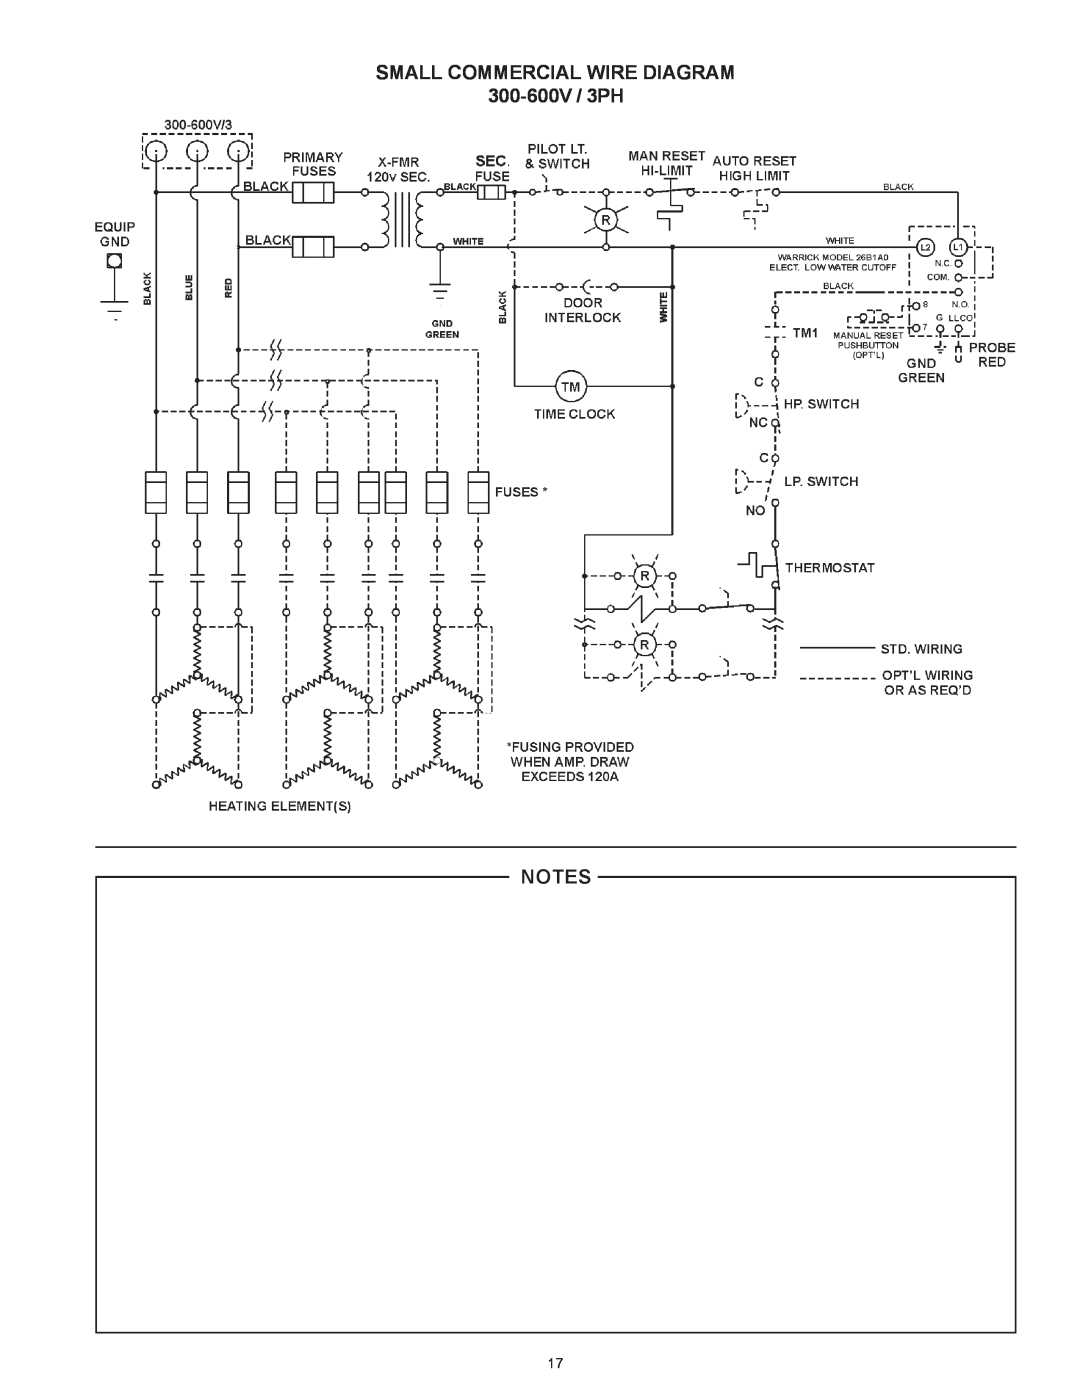 State Industries SSE-120, SSE-5 warranty SMALL COMMERCIAL WIRE DIAGRAM 300-600V / 3PH 